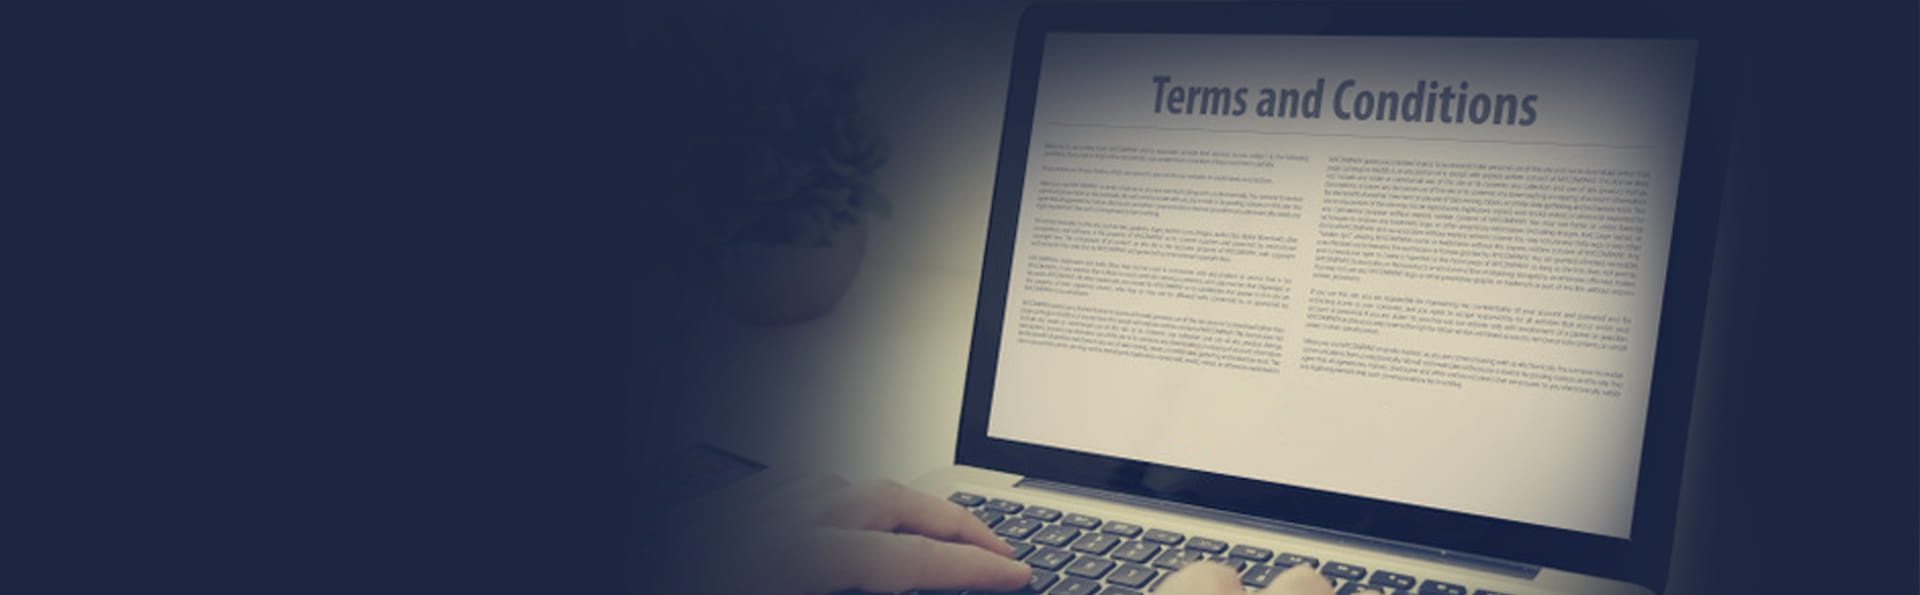 terms conditions banner 1